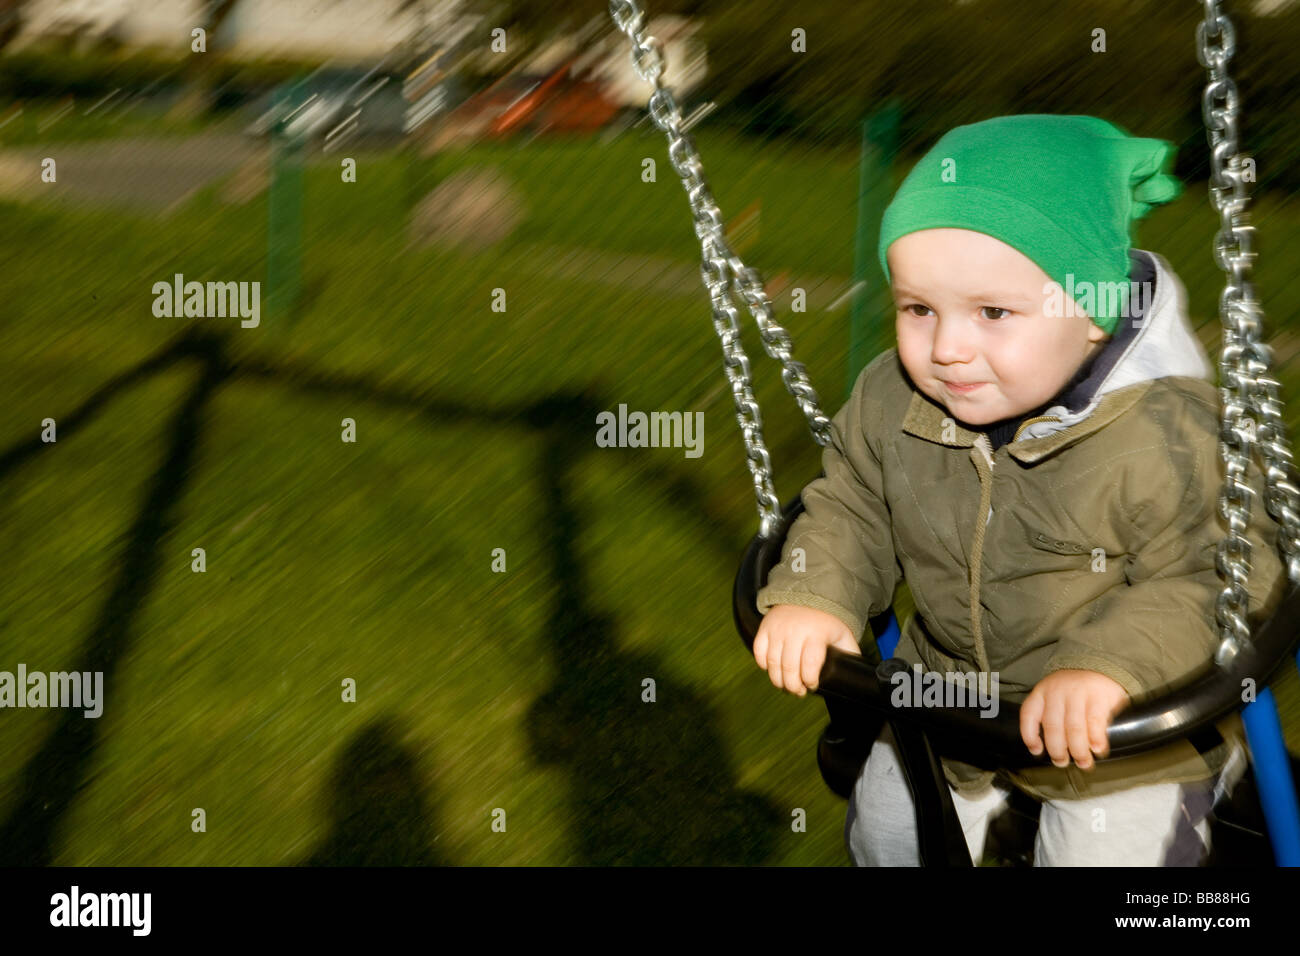 people, close-up, one, child, girl, boy, 0-5, years, hat, swing, smile, smiling, outdoor, spring, autumn, horizontal Stock Photo